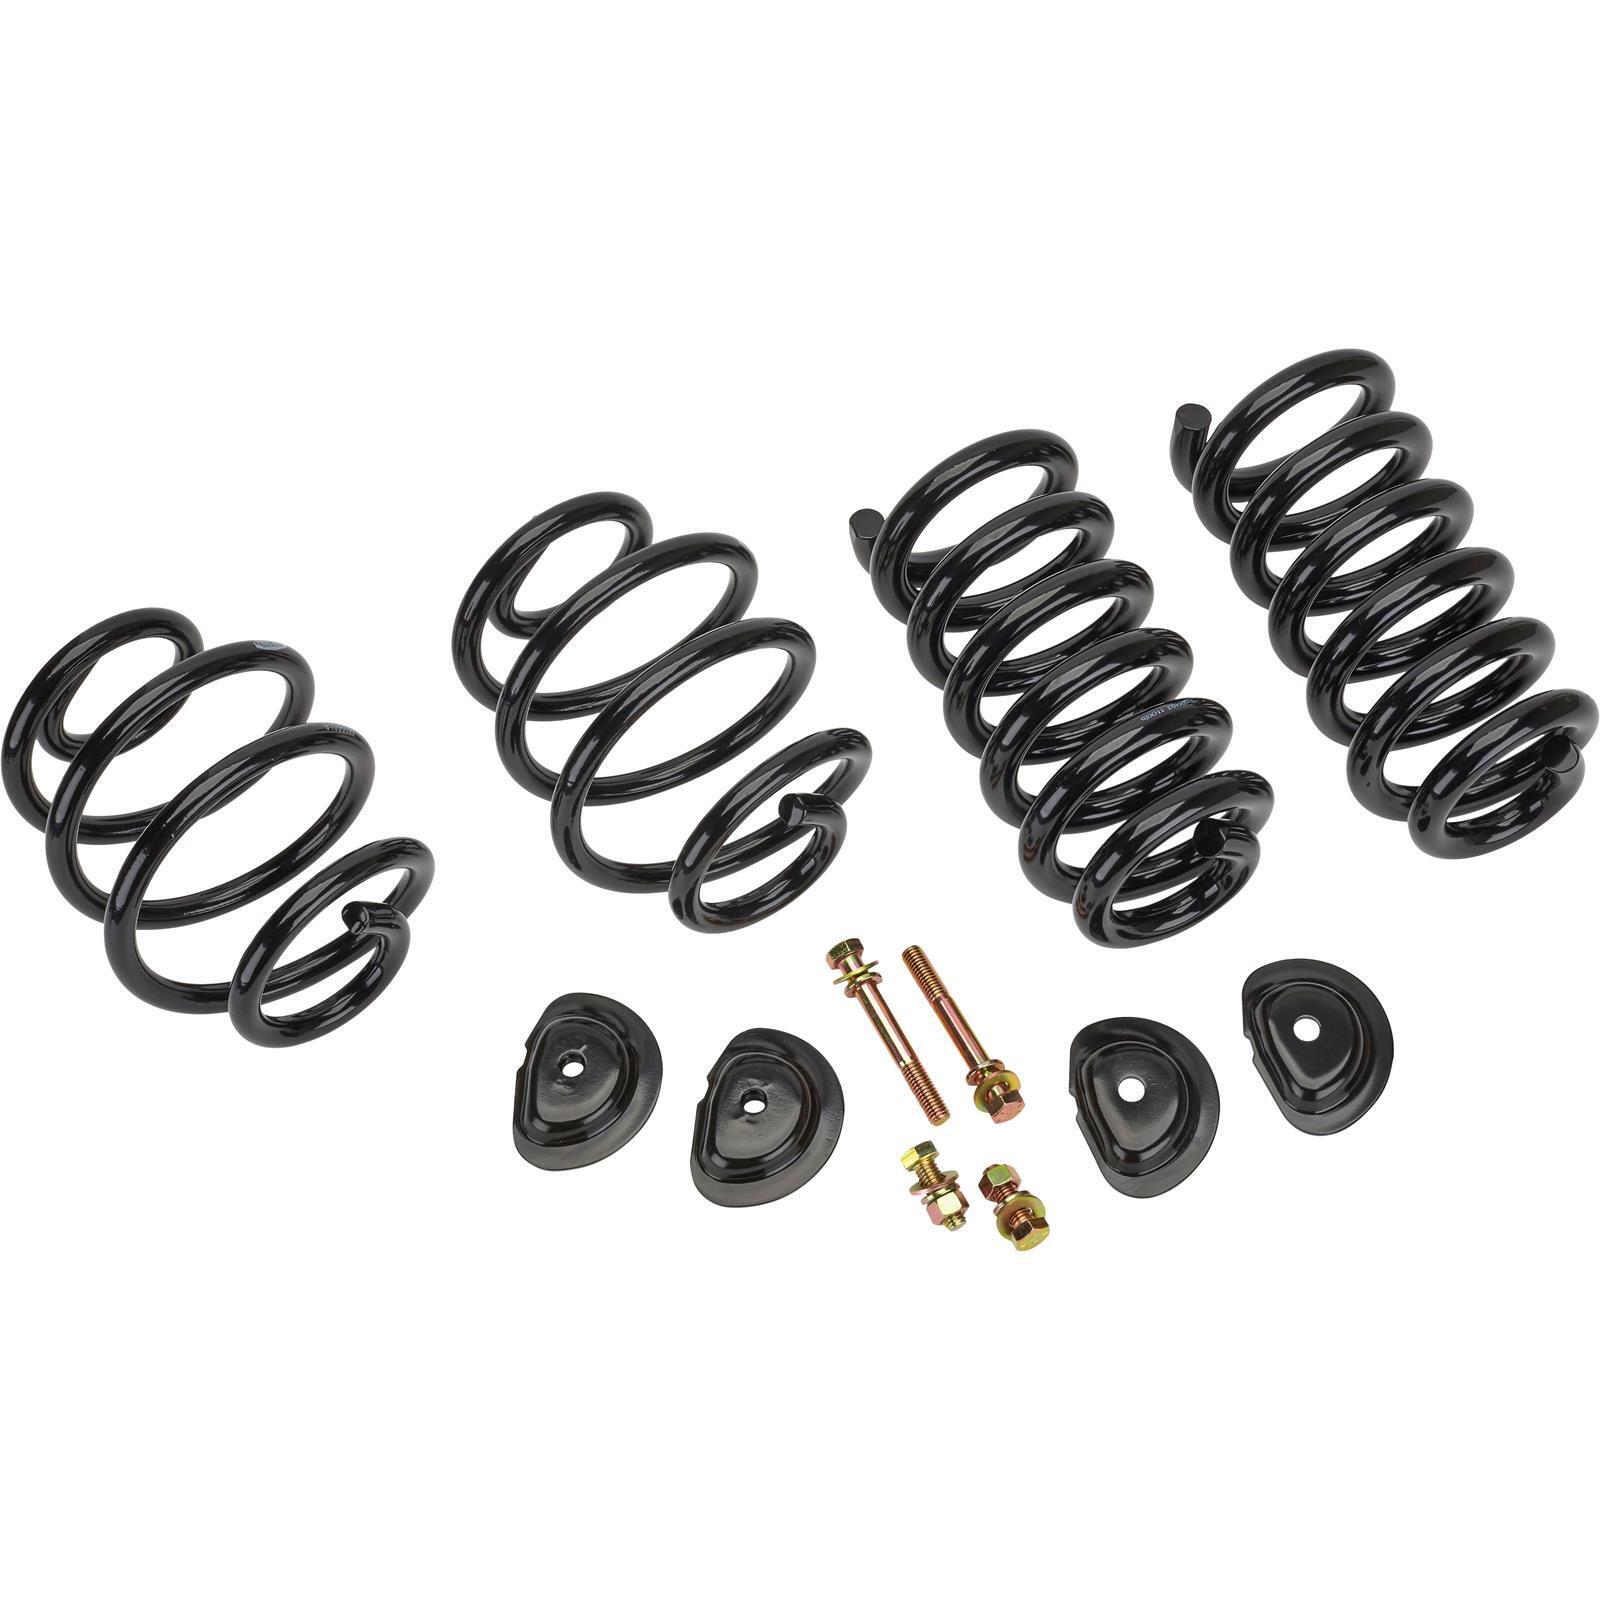 1963-72 Chevy C10 3 Inch Front / 5 Inch Rear Drop Spring Lowering Kit